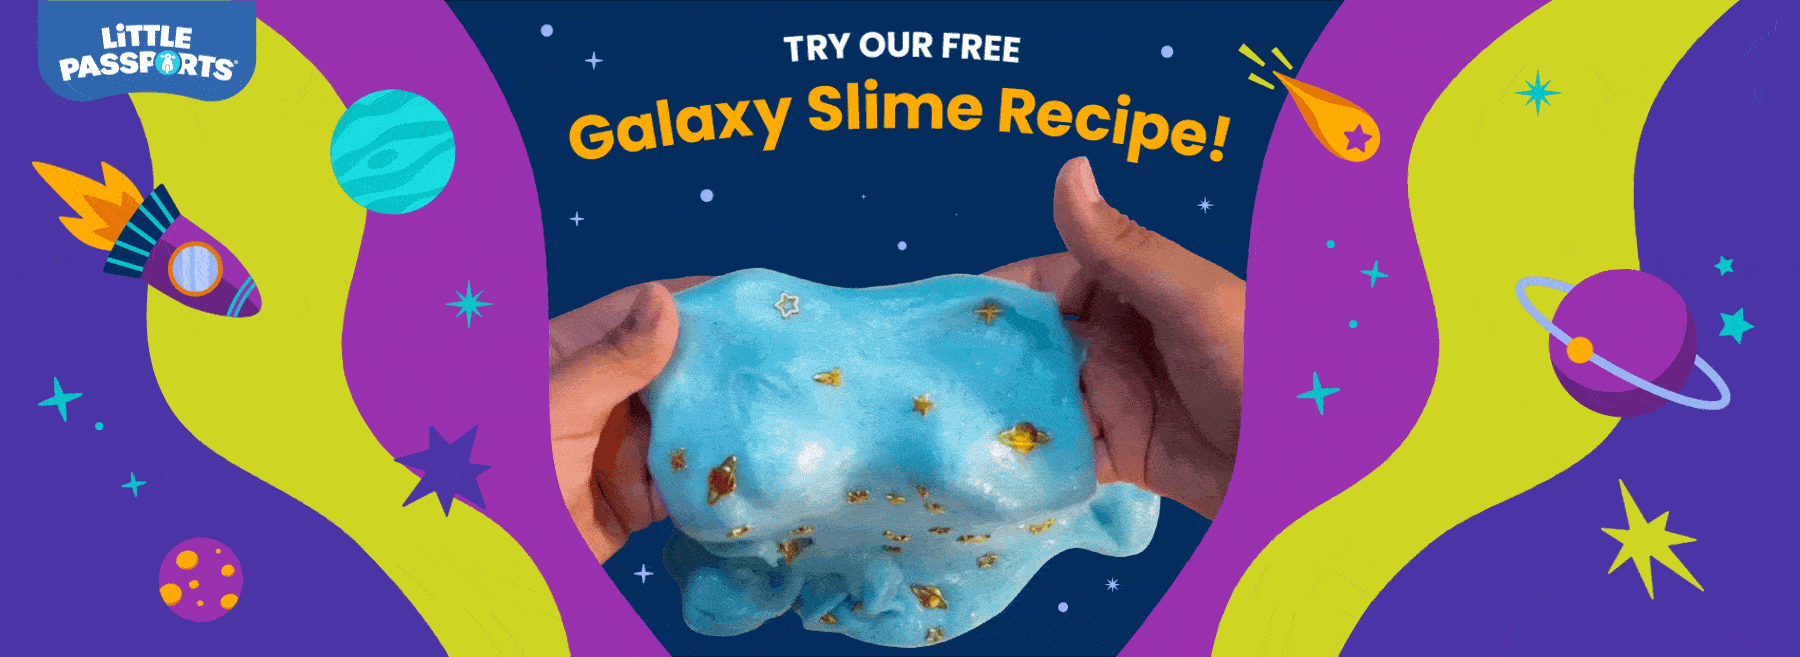 Ad: Little Passports logo; Photo of hands stretching out blue sparkly slime, text reading Try Our Free Galaxy Slime Recipe